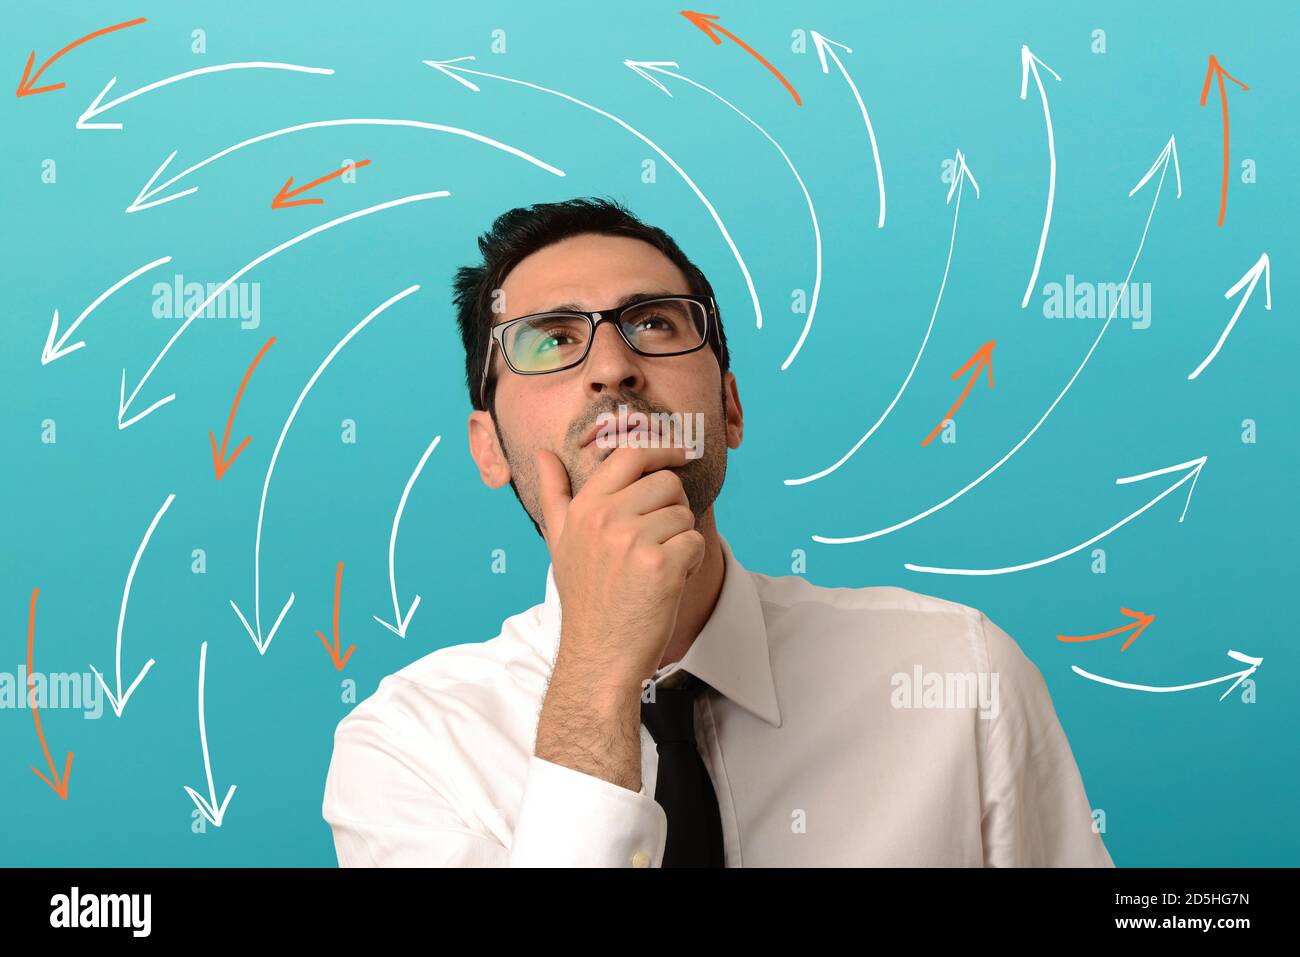 Confused and pensive man thinks about the best way forward. Stock Photo